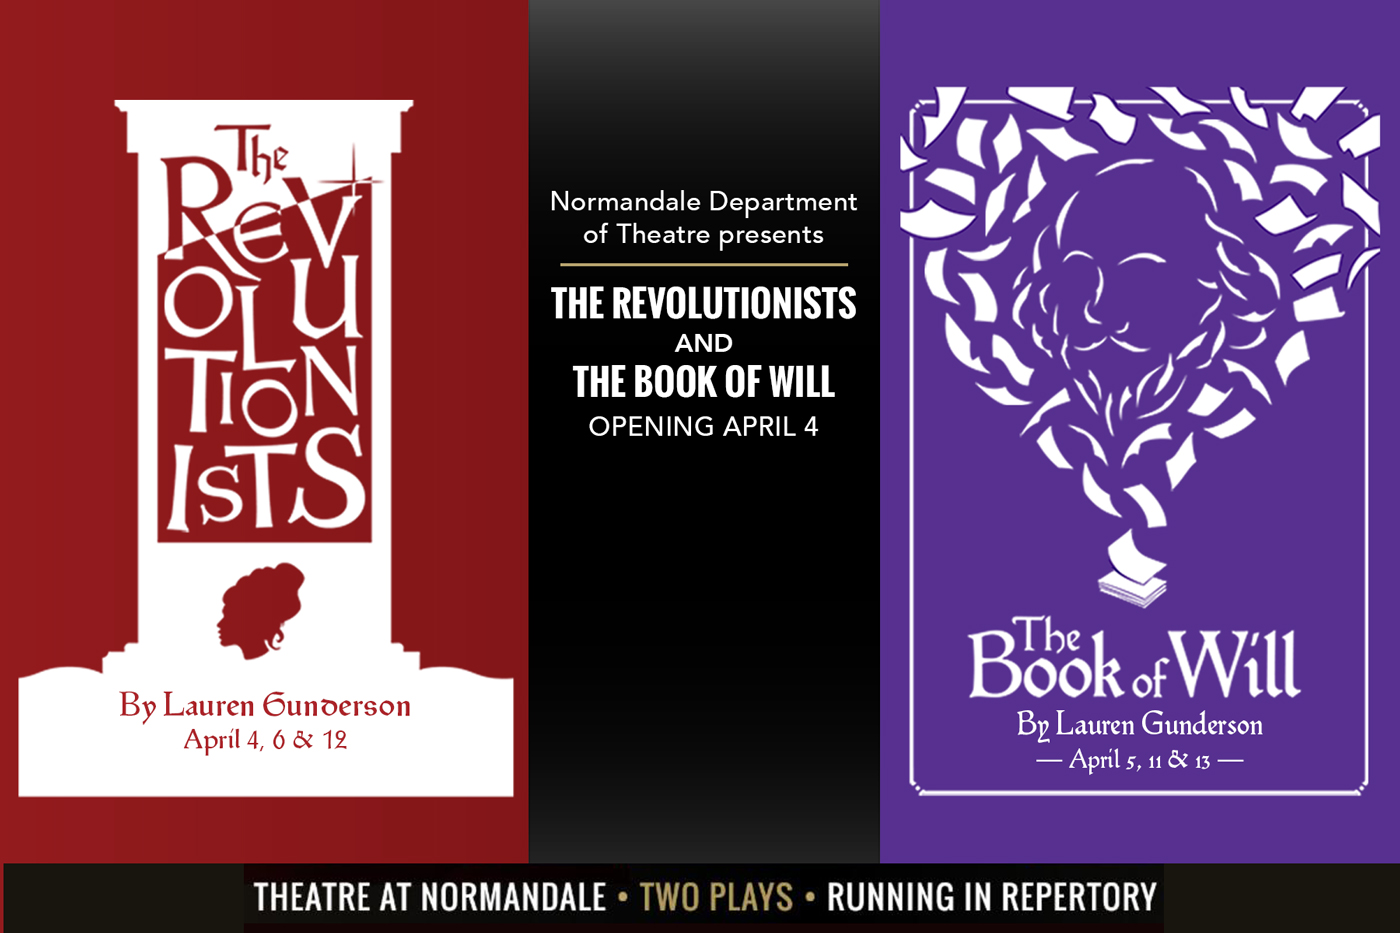 Posters for The Book of Will and The Revolutionlists